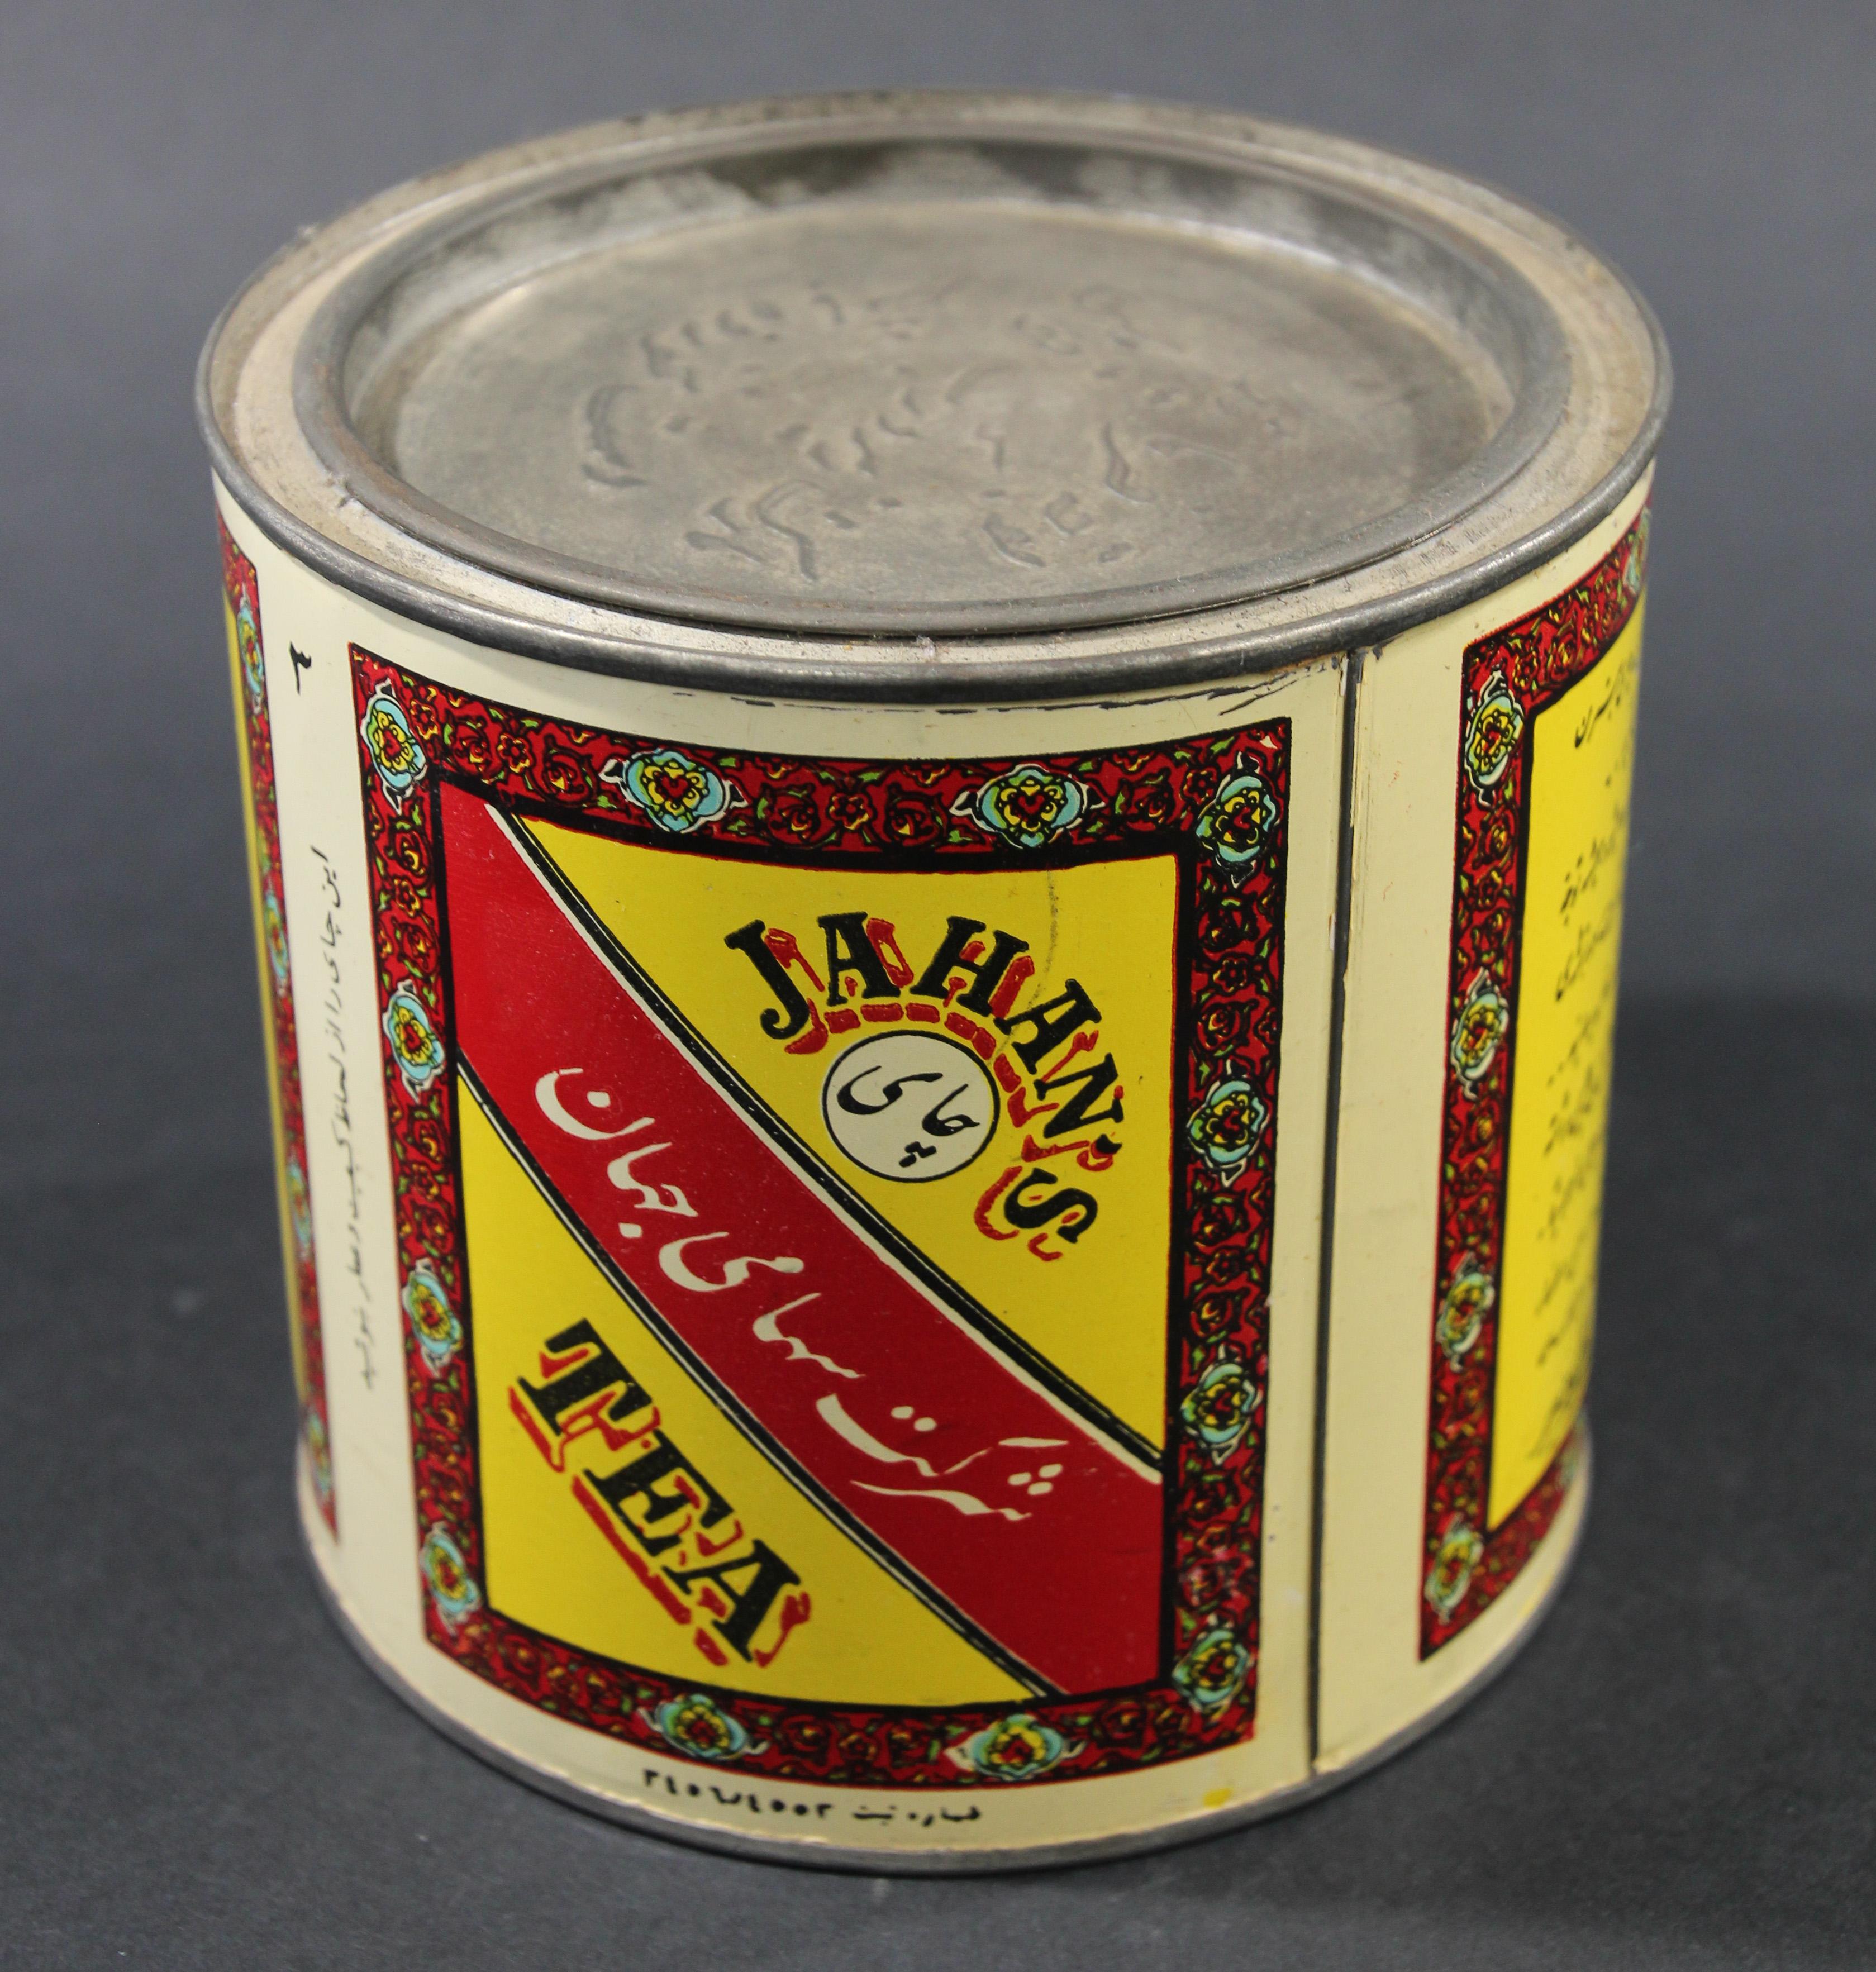 Metal Vintage Collectible Tin Canister Jahan's Darjeeling Tea from India